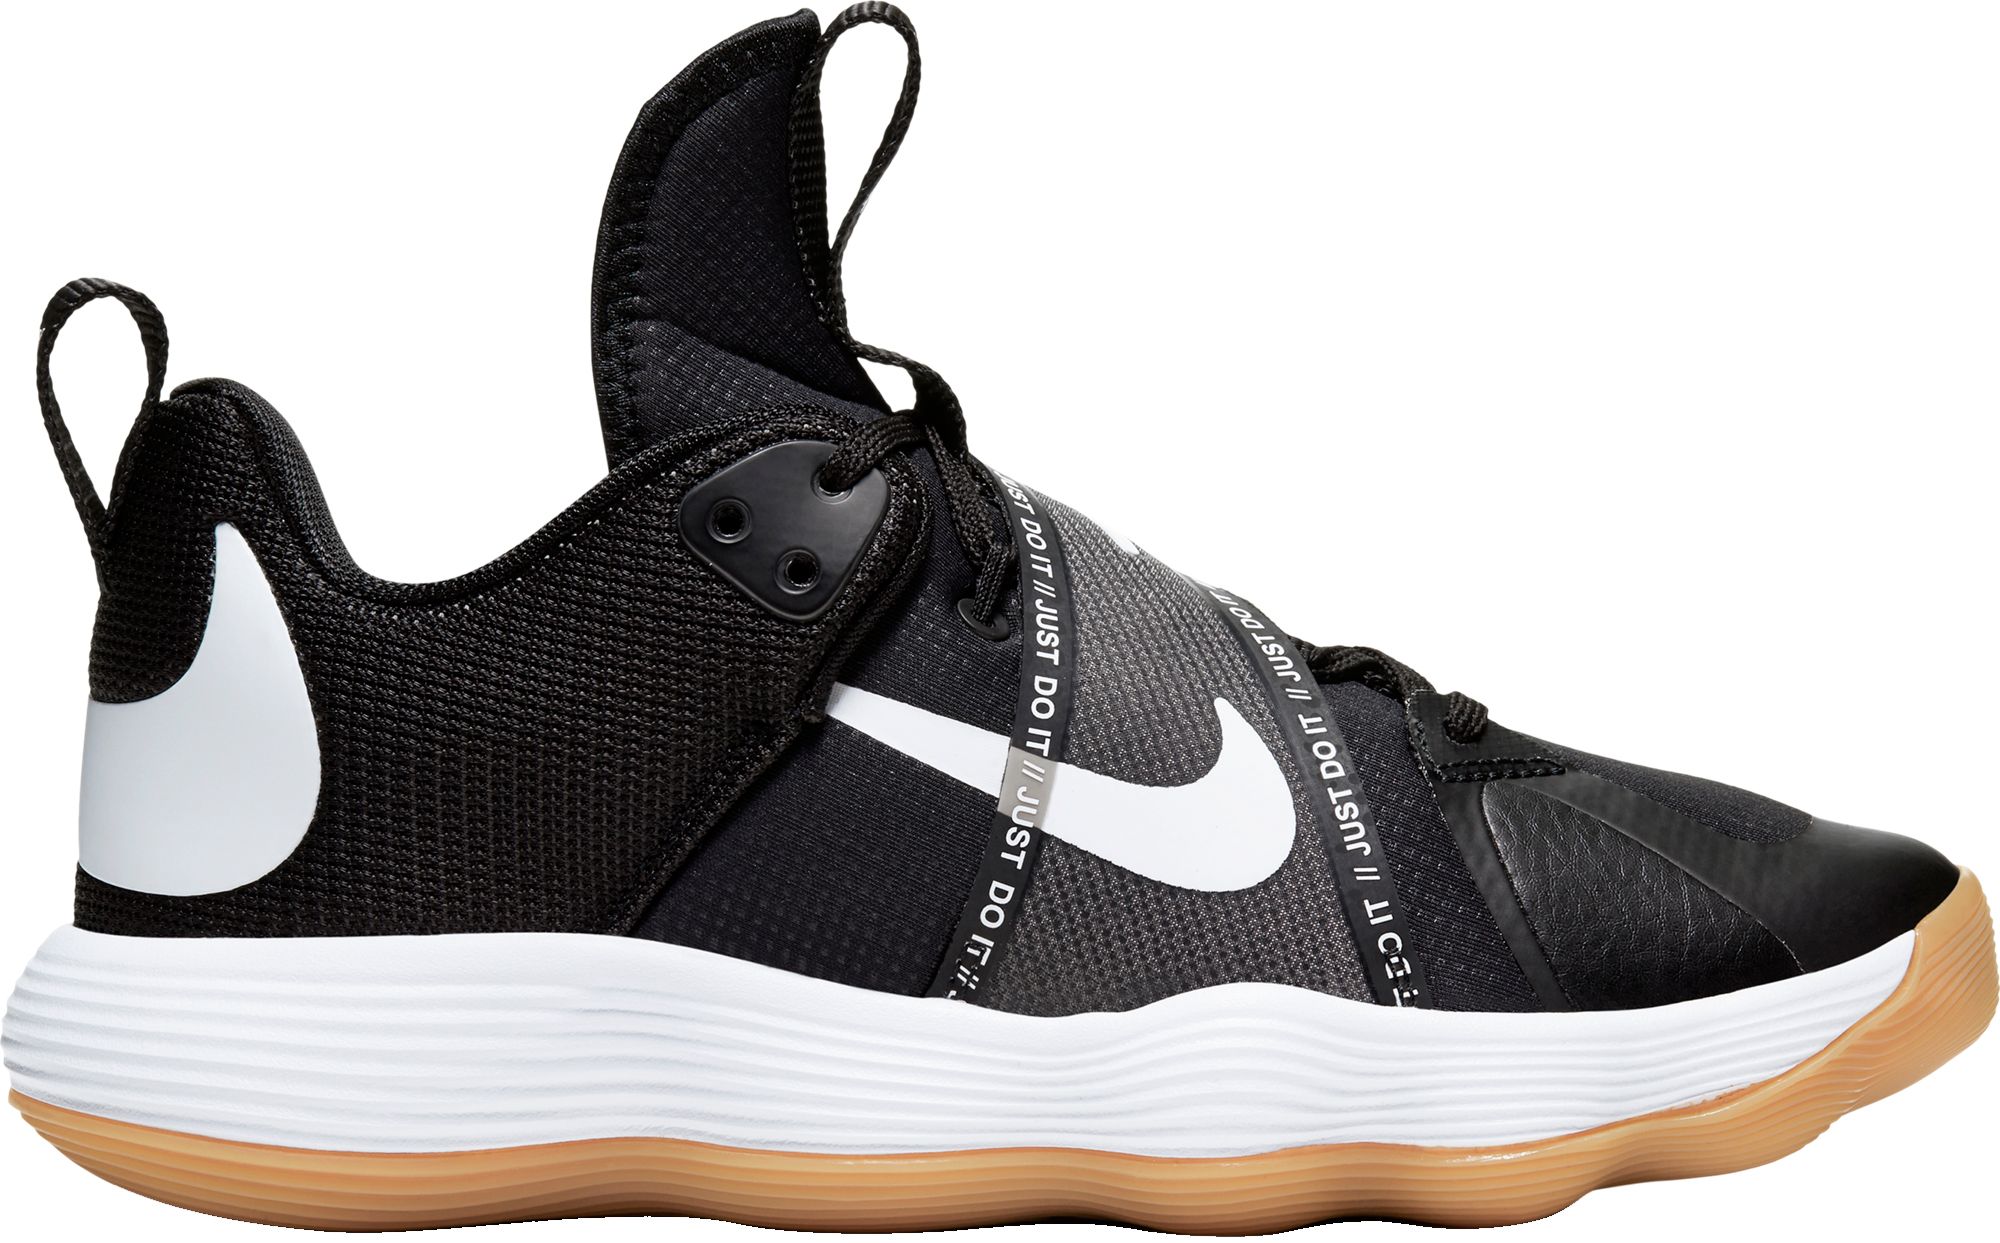 nike high top volleyball shoes